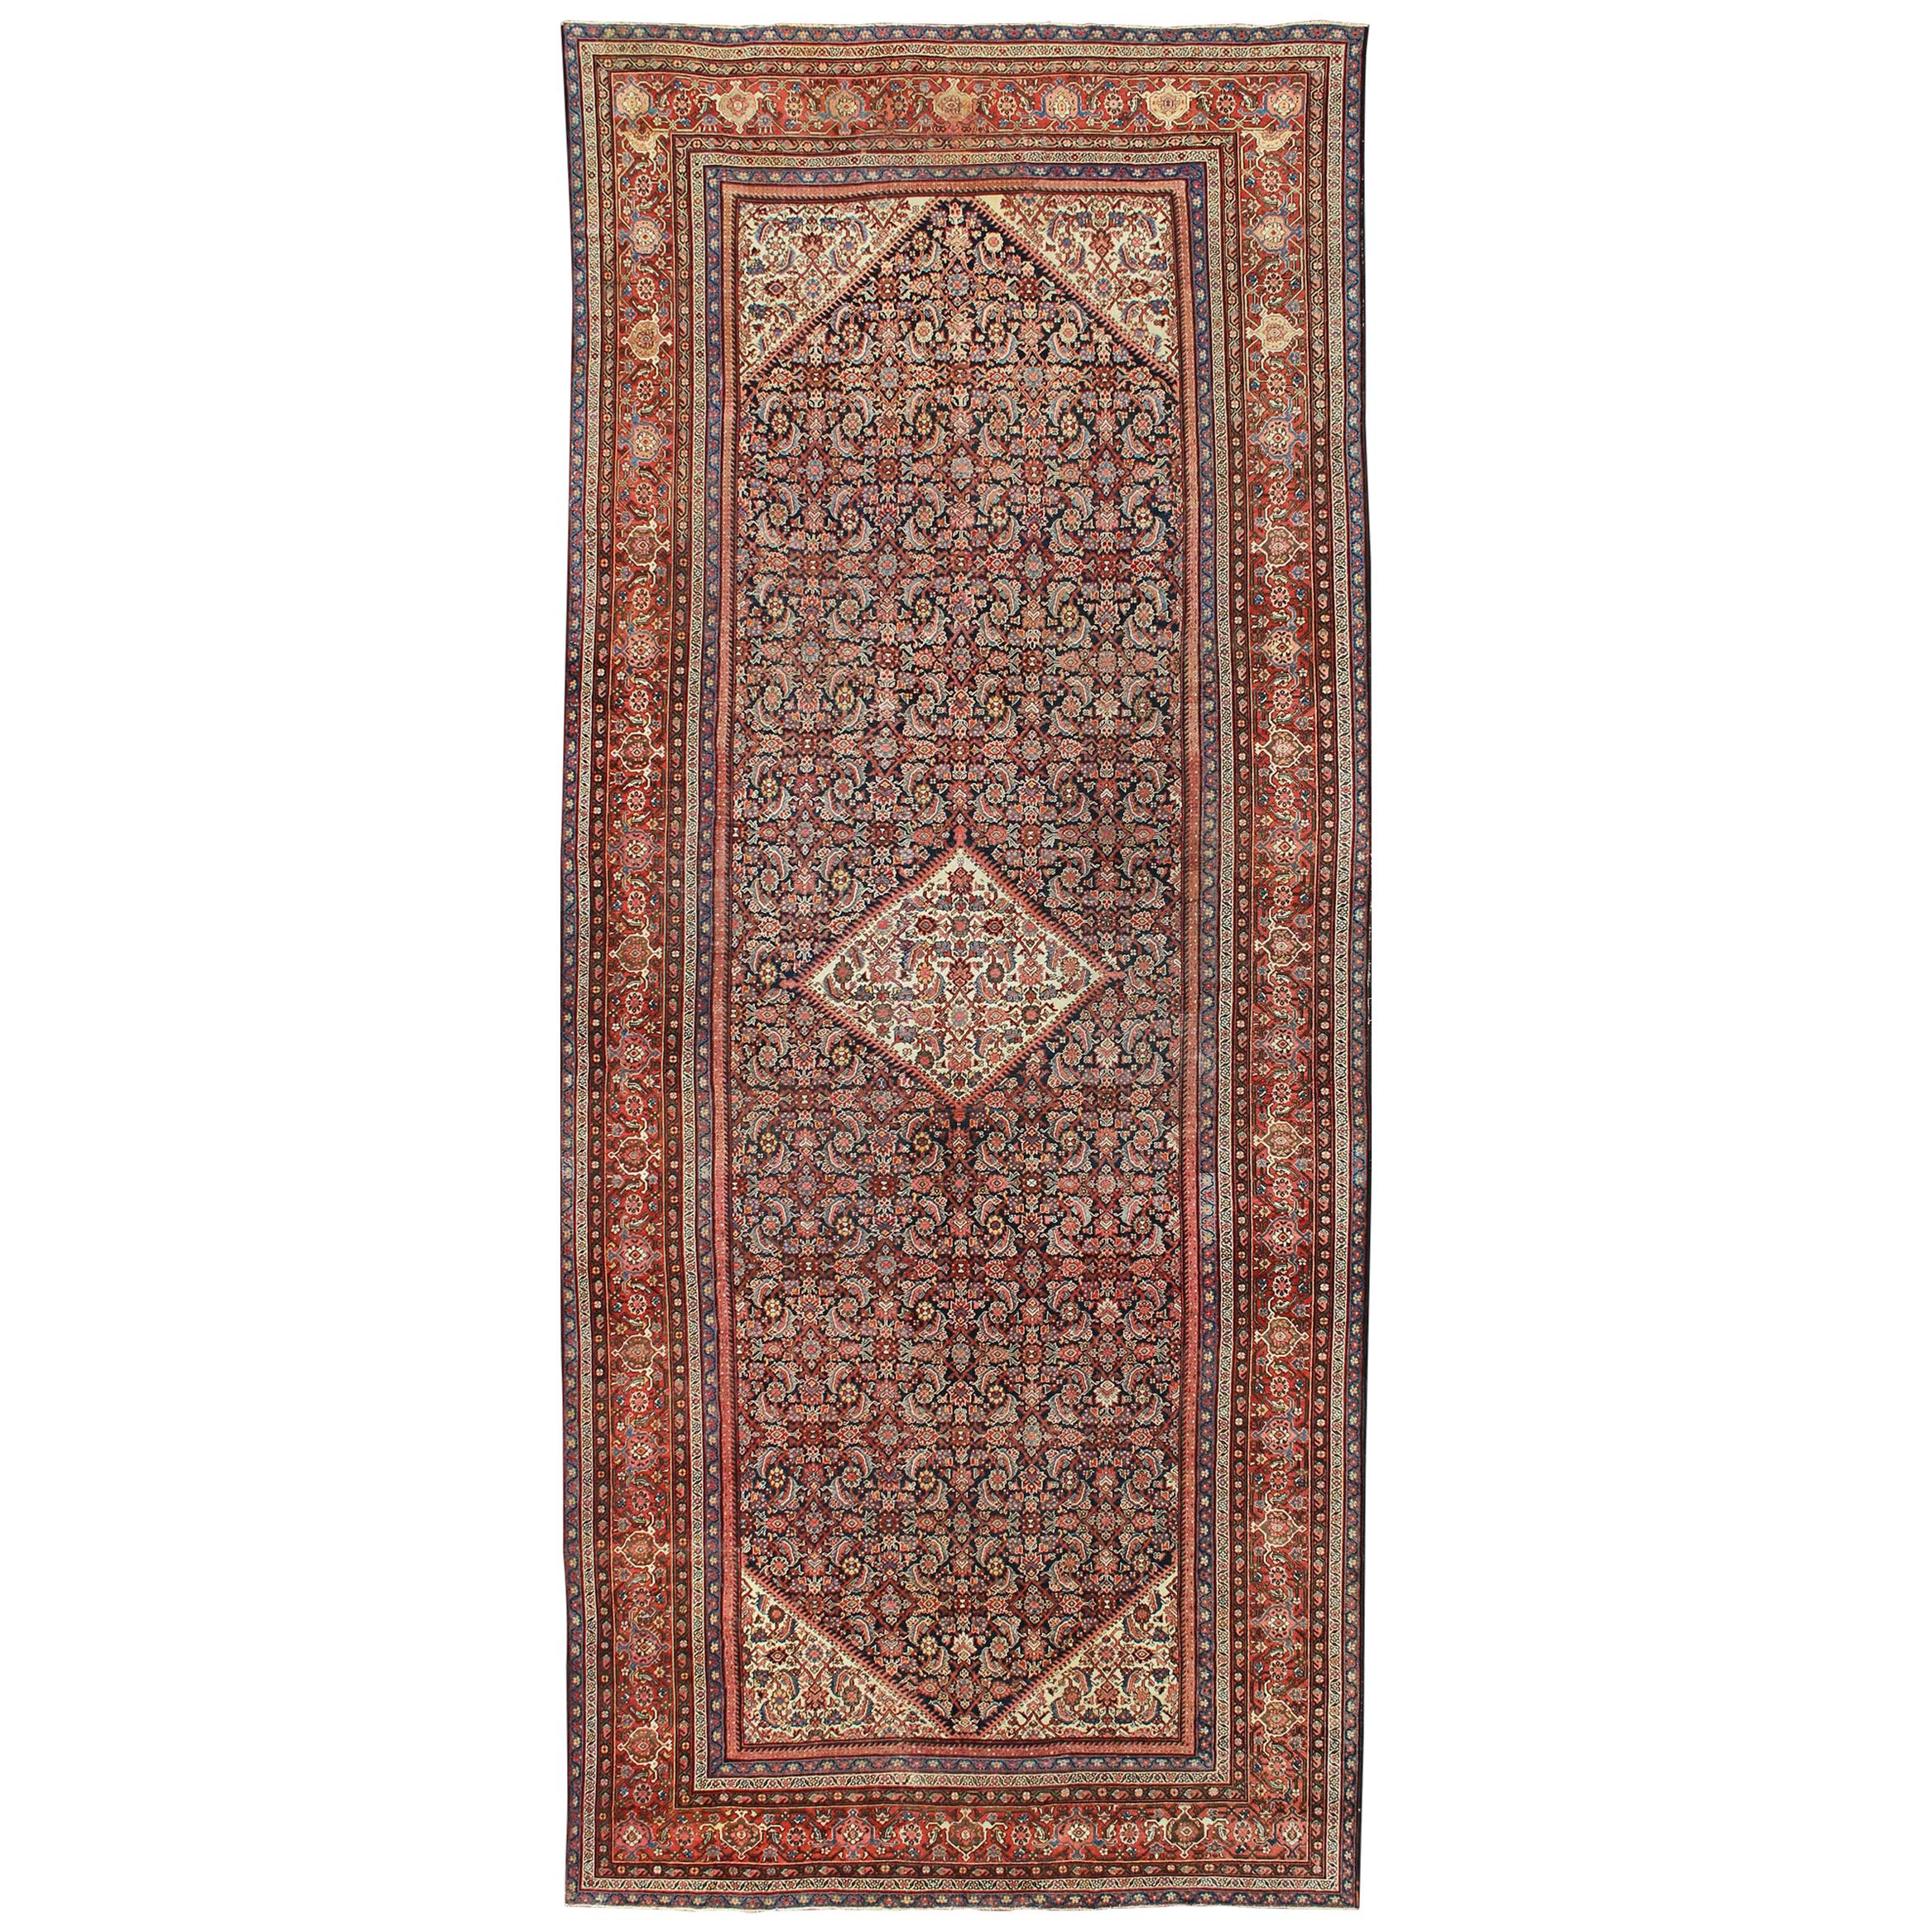 Very Long Persian Sultanabad Rug with Herati Design in Dark Blue and Red